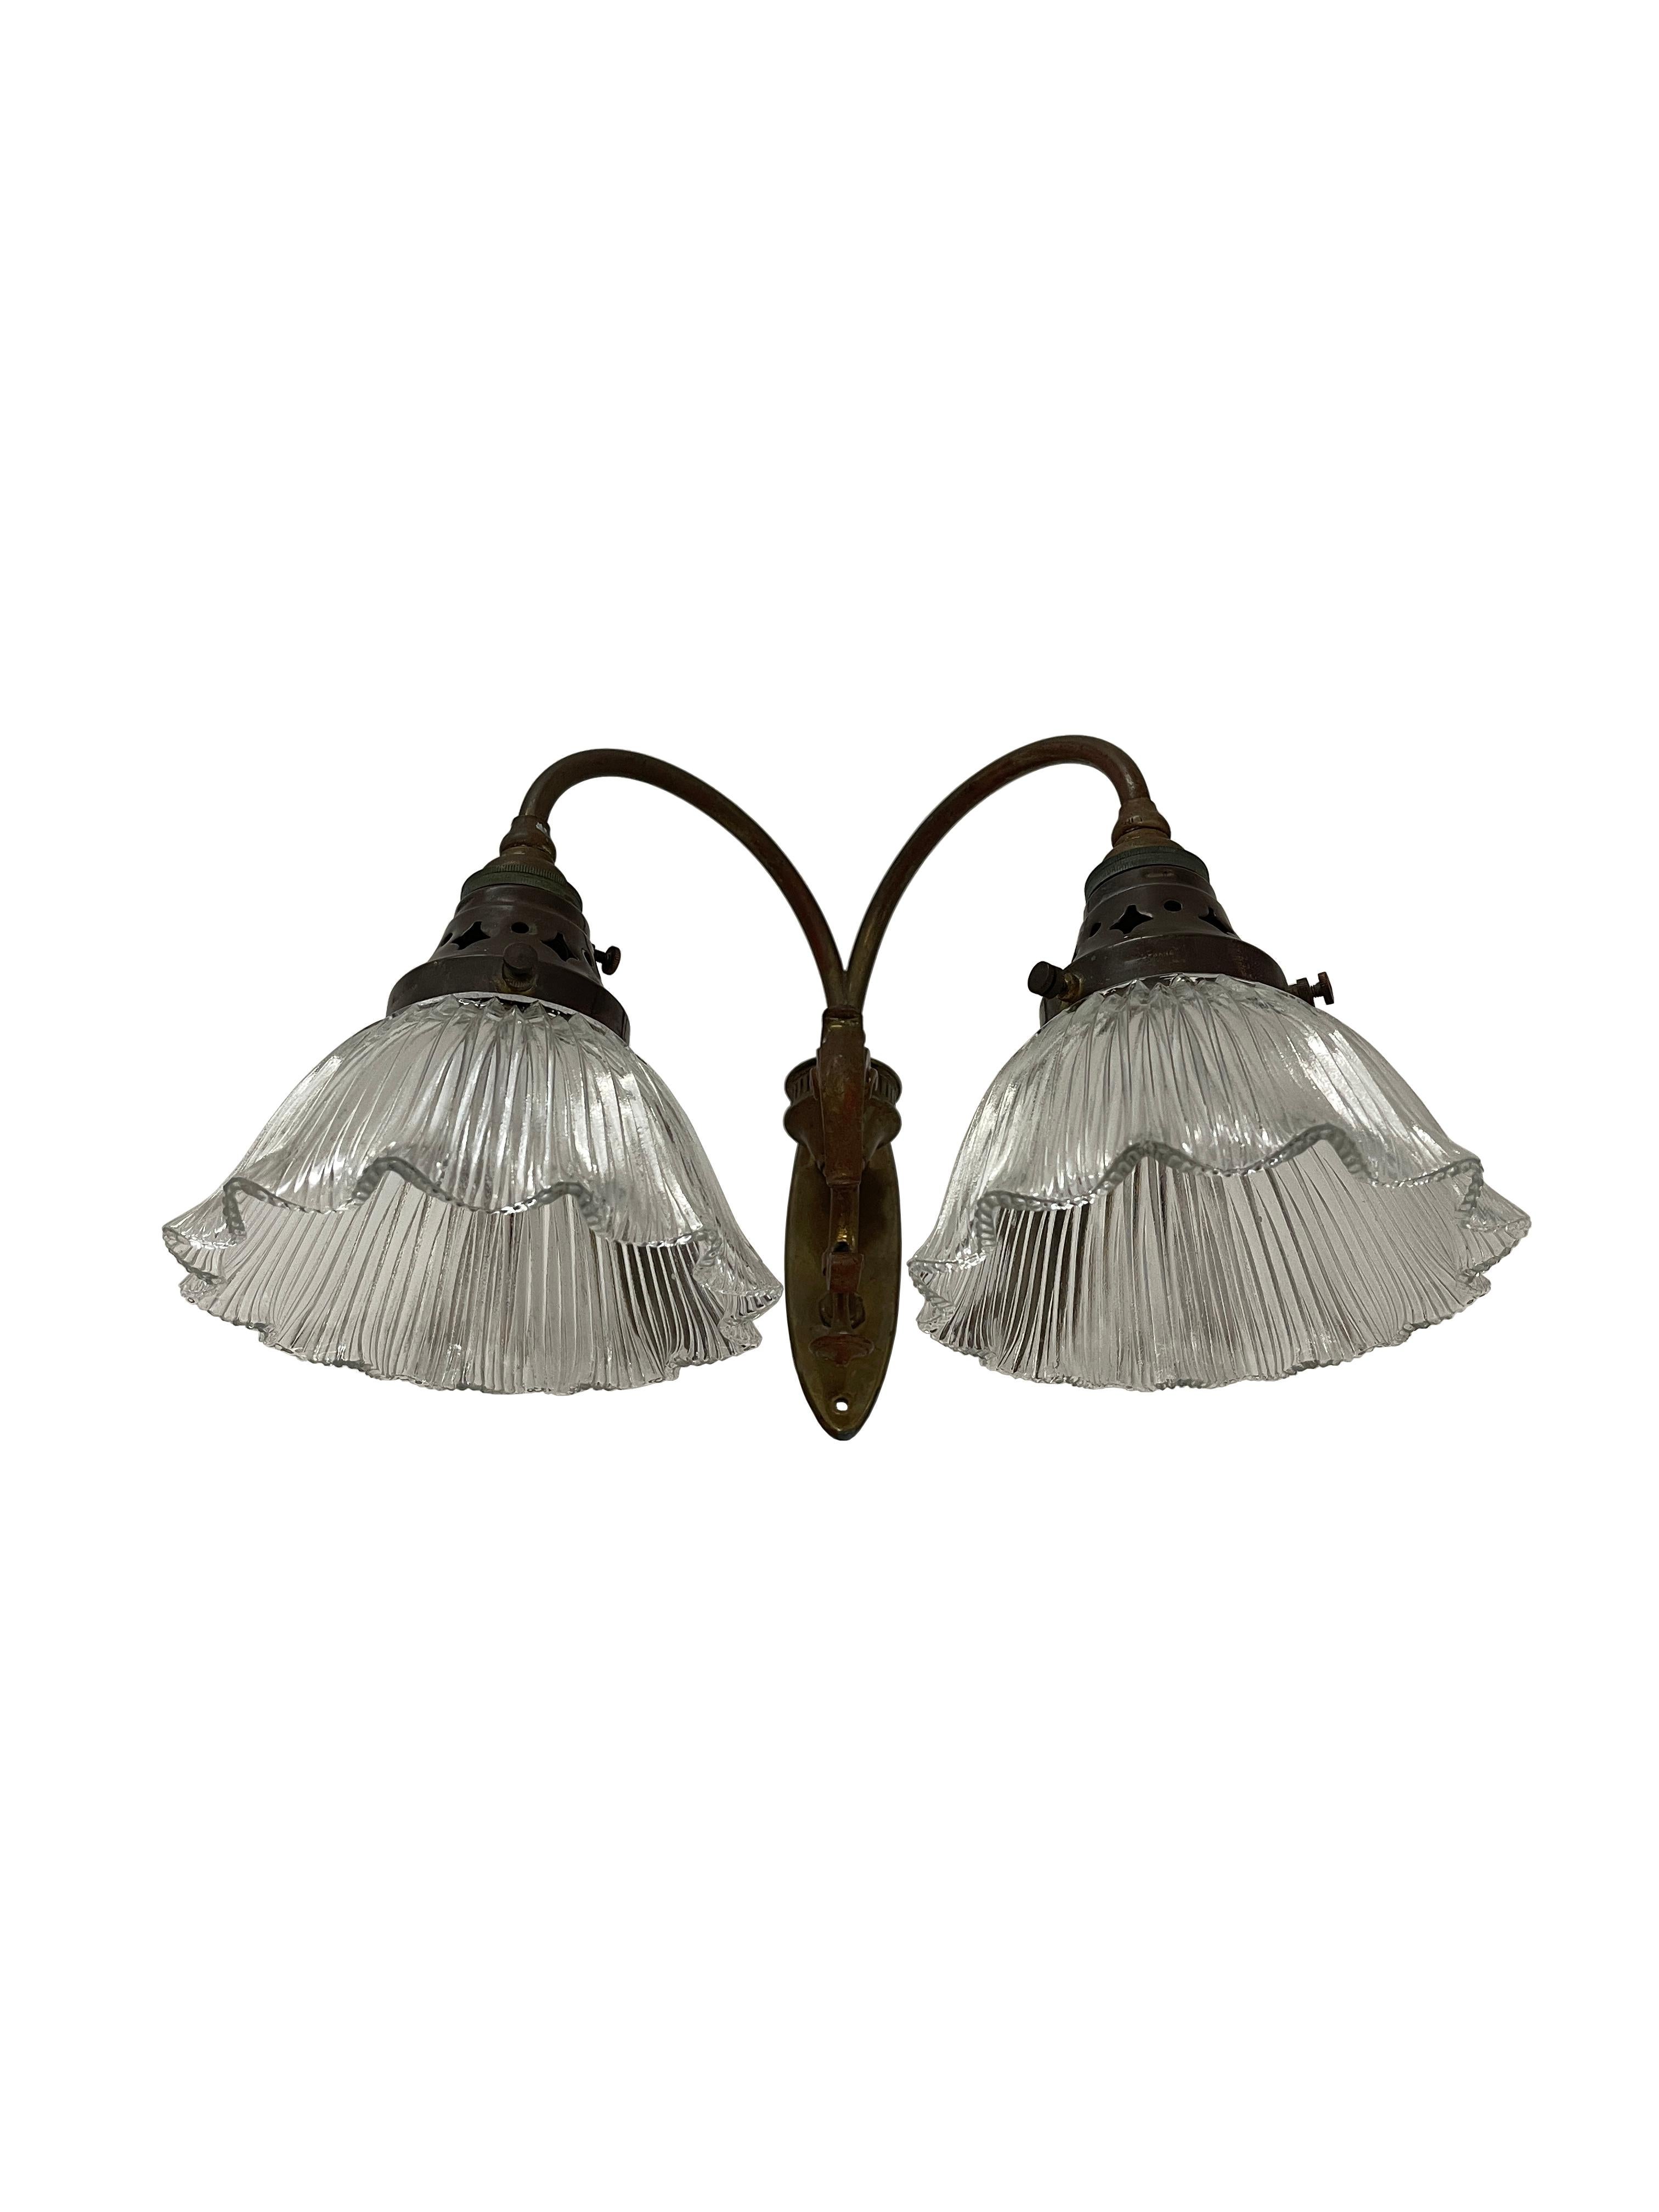 Large Antique Vintage Holophane Ceiling Chandelier Pendant Lamp Wall Light Set In Good Condition For Sale In Sale, GB